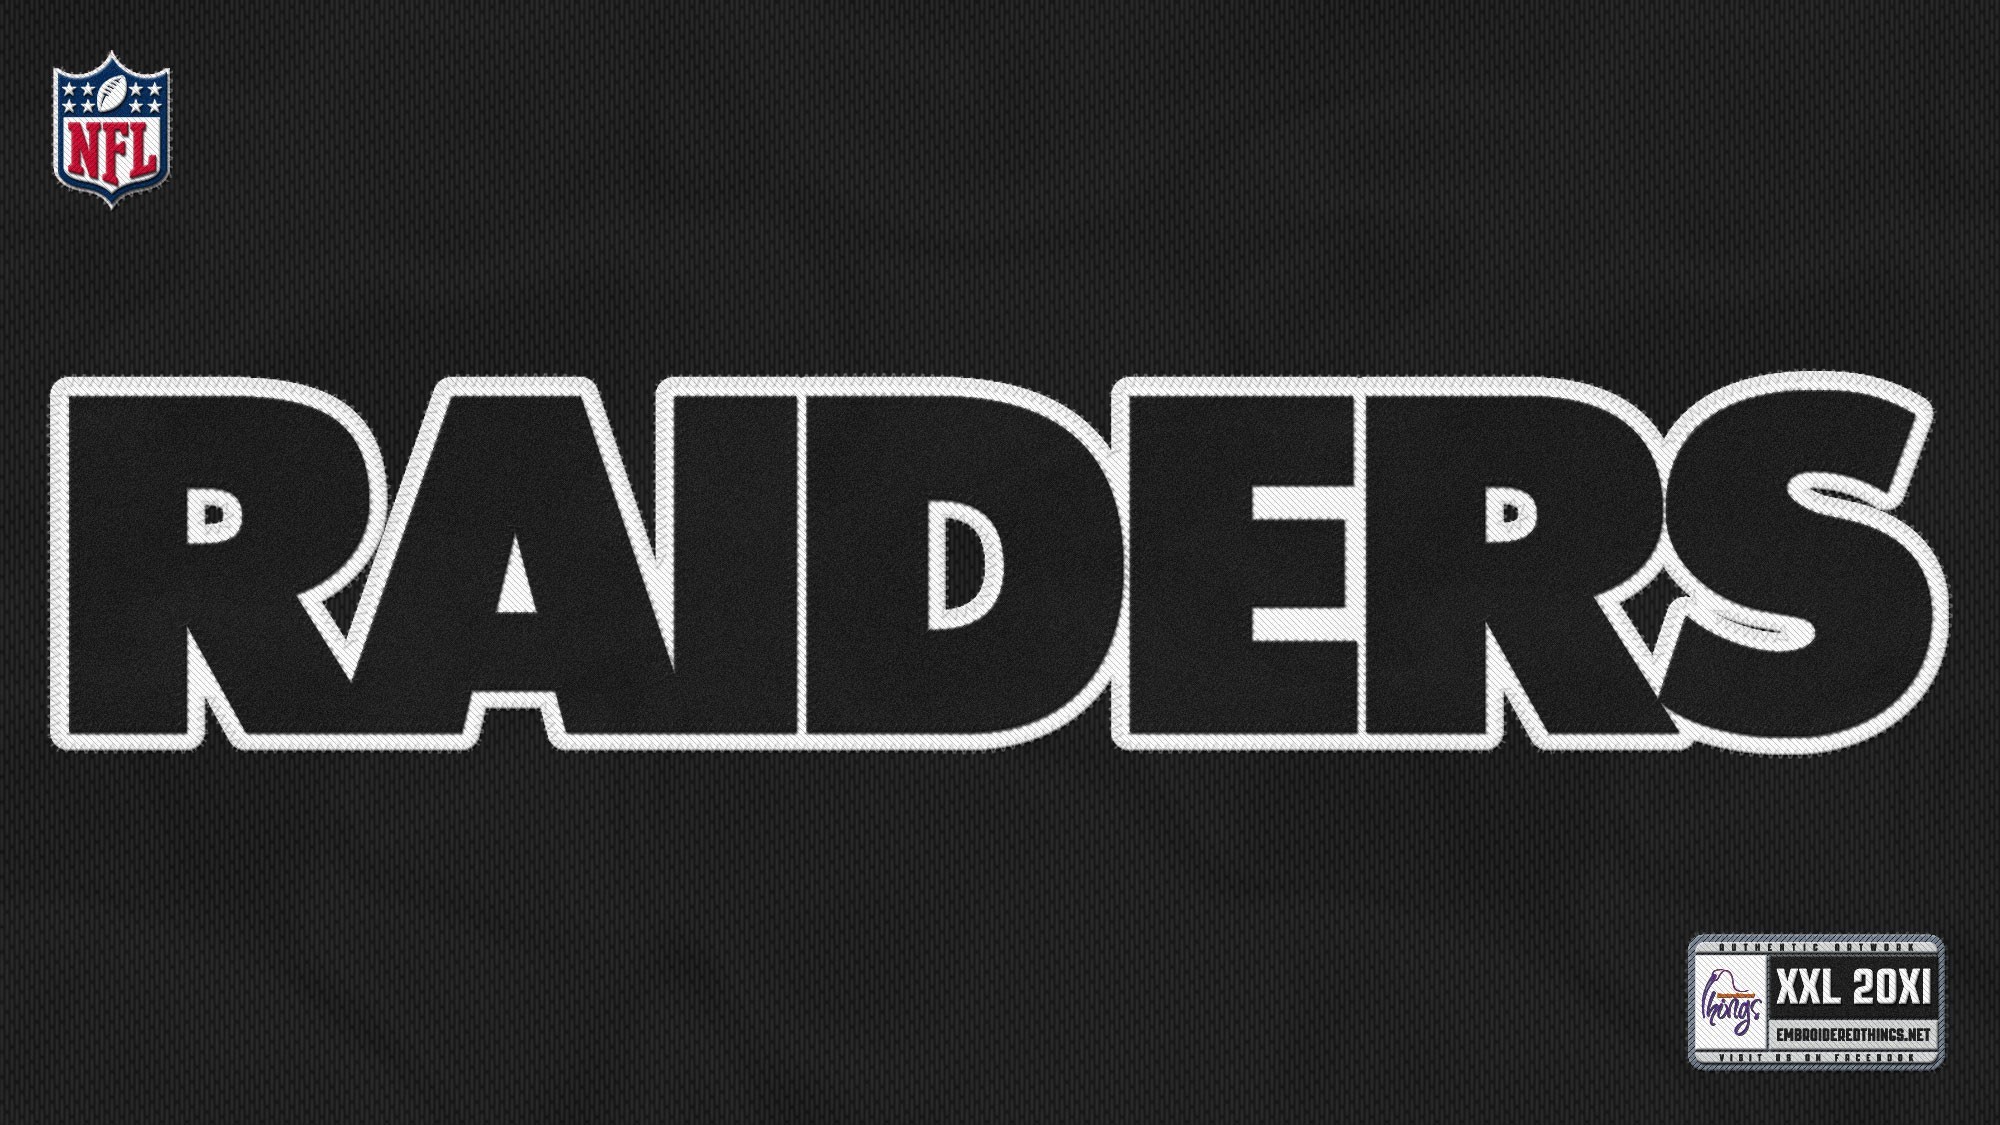 2000x1125  out! our new Oakland Raiders wallpaper | Oakland Raiders  wallpapers .